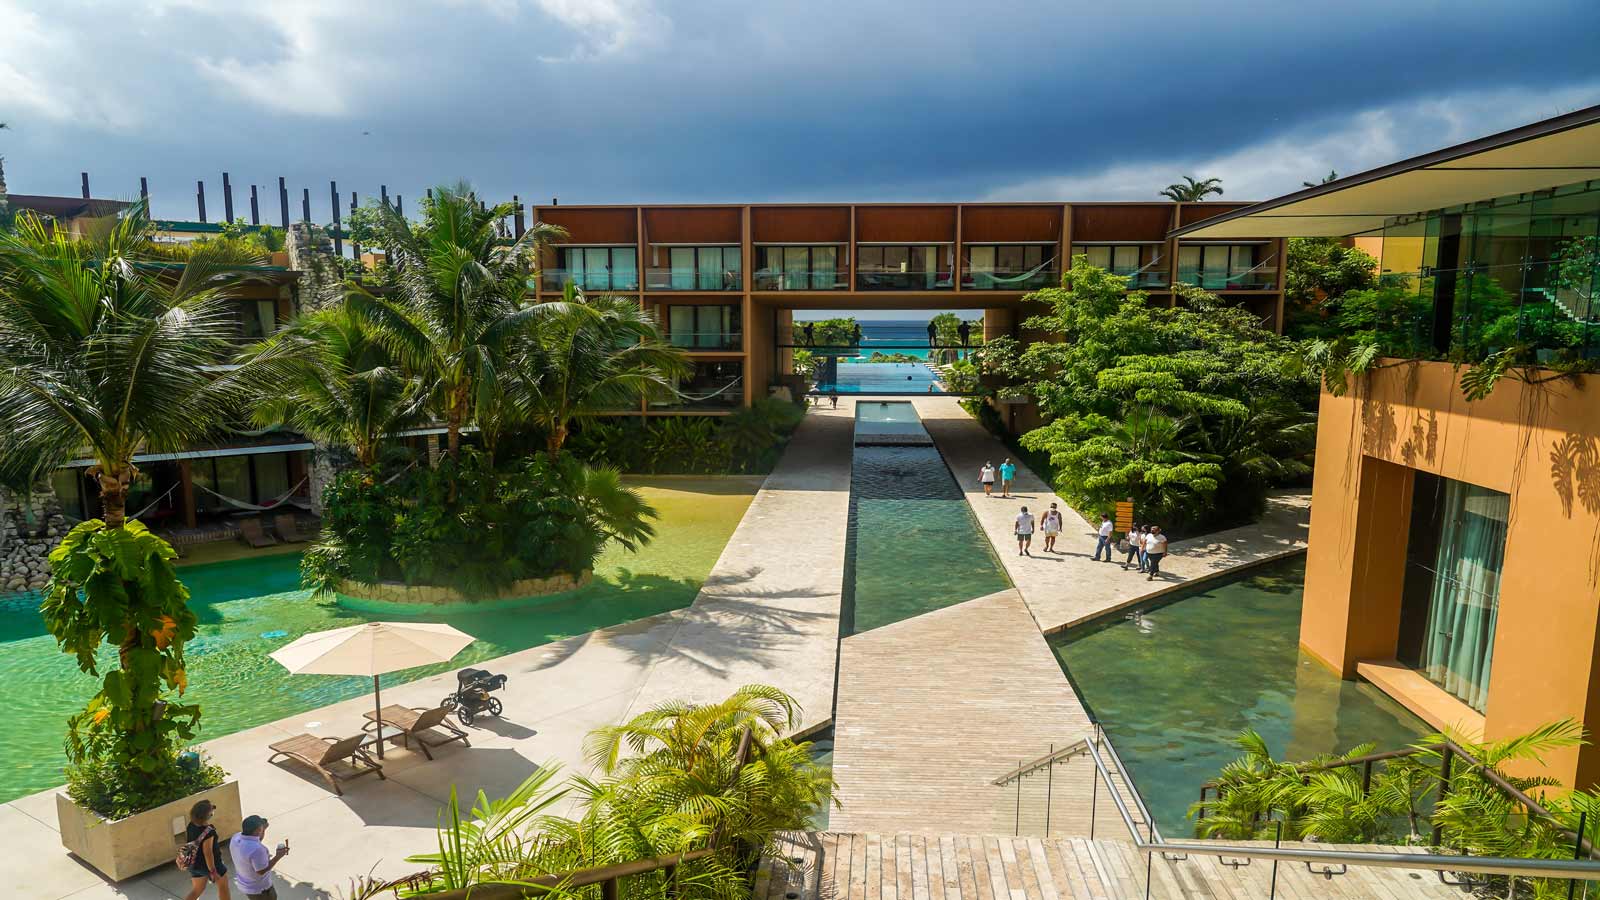 <p><strong>Address: </strong>Carretera Federal Chetumal-Puerto Juárez, Av. Solidaridad 2-Kilómetro 282 Lt 023, 77710 Playa del Carmen, Q.R., Mexico</p><p>Experience one of the best accommodations in Playa del Carmen at Hoteles Xcaret. This all-inclusive luxury hotel offers tailor-made experiences for customers, from families with little kids to solo travelers collecting unique experiences. </p>